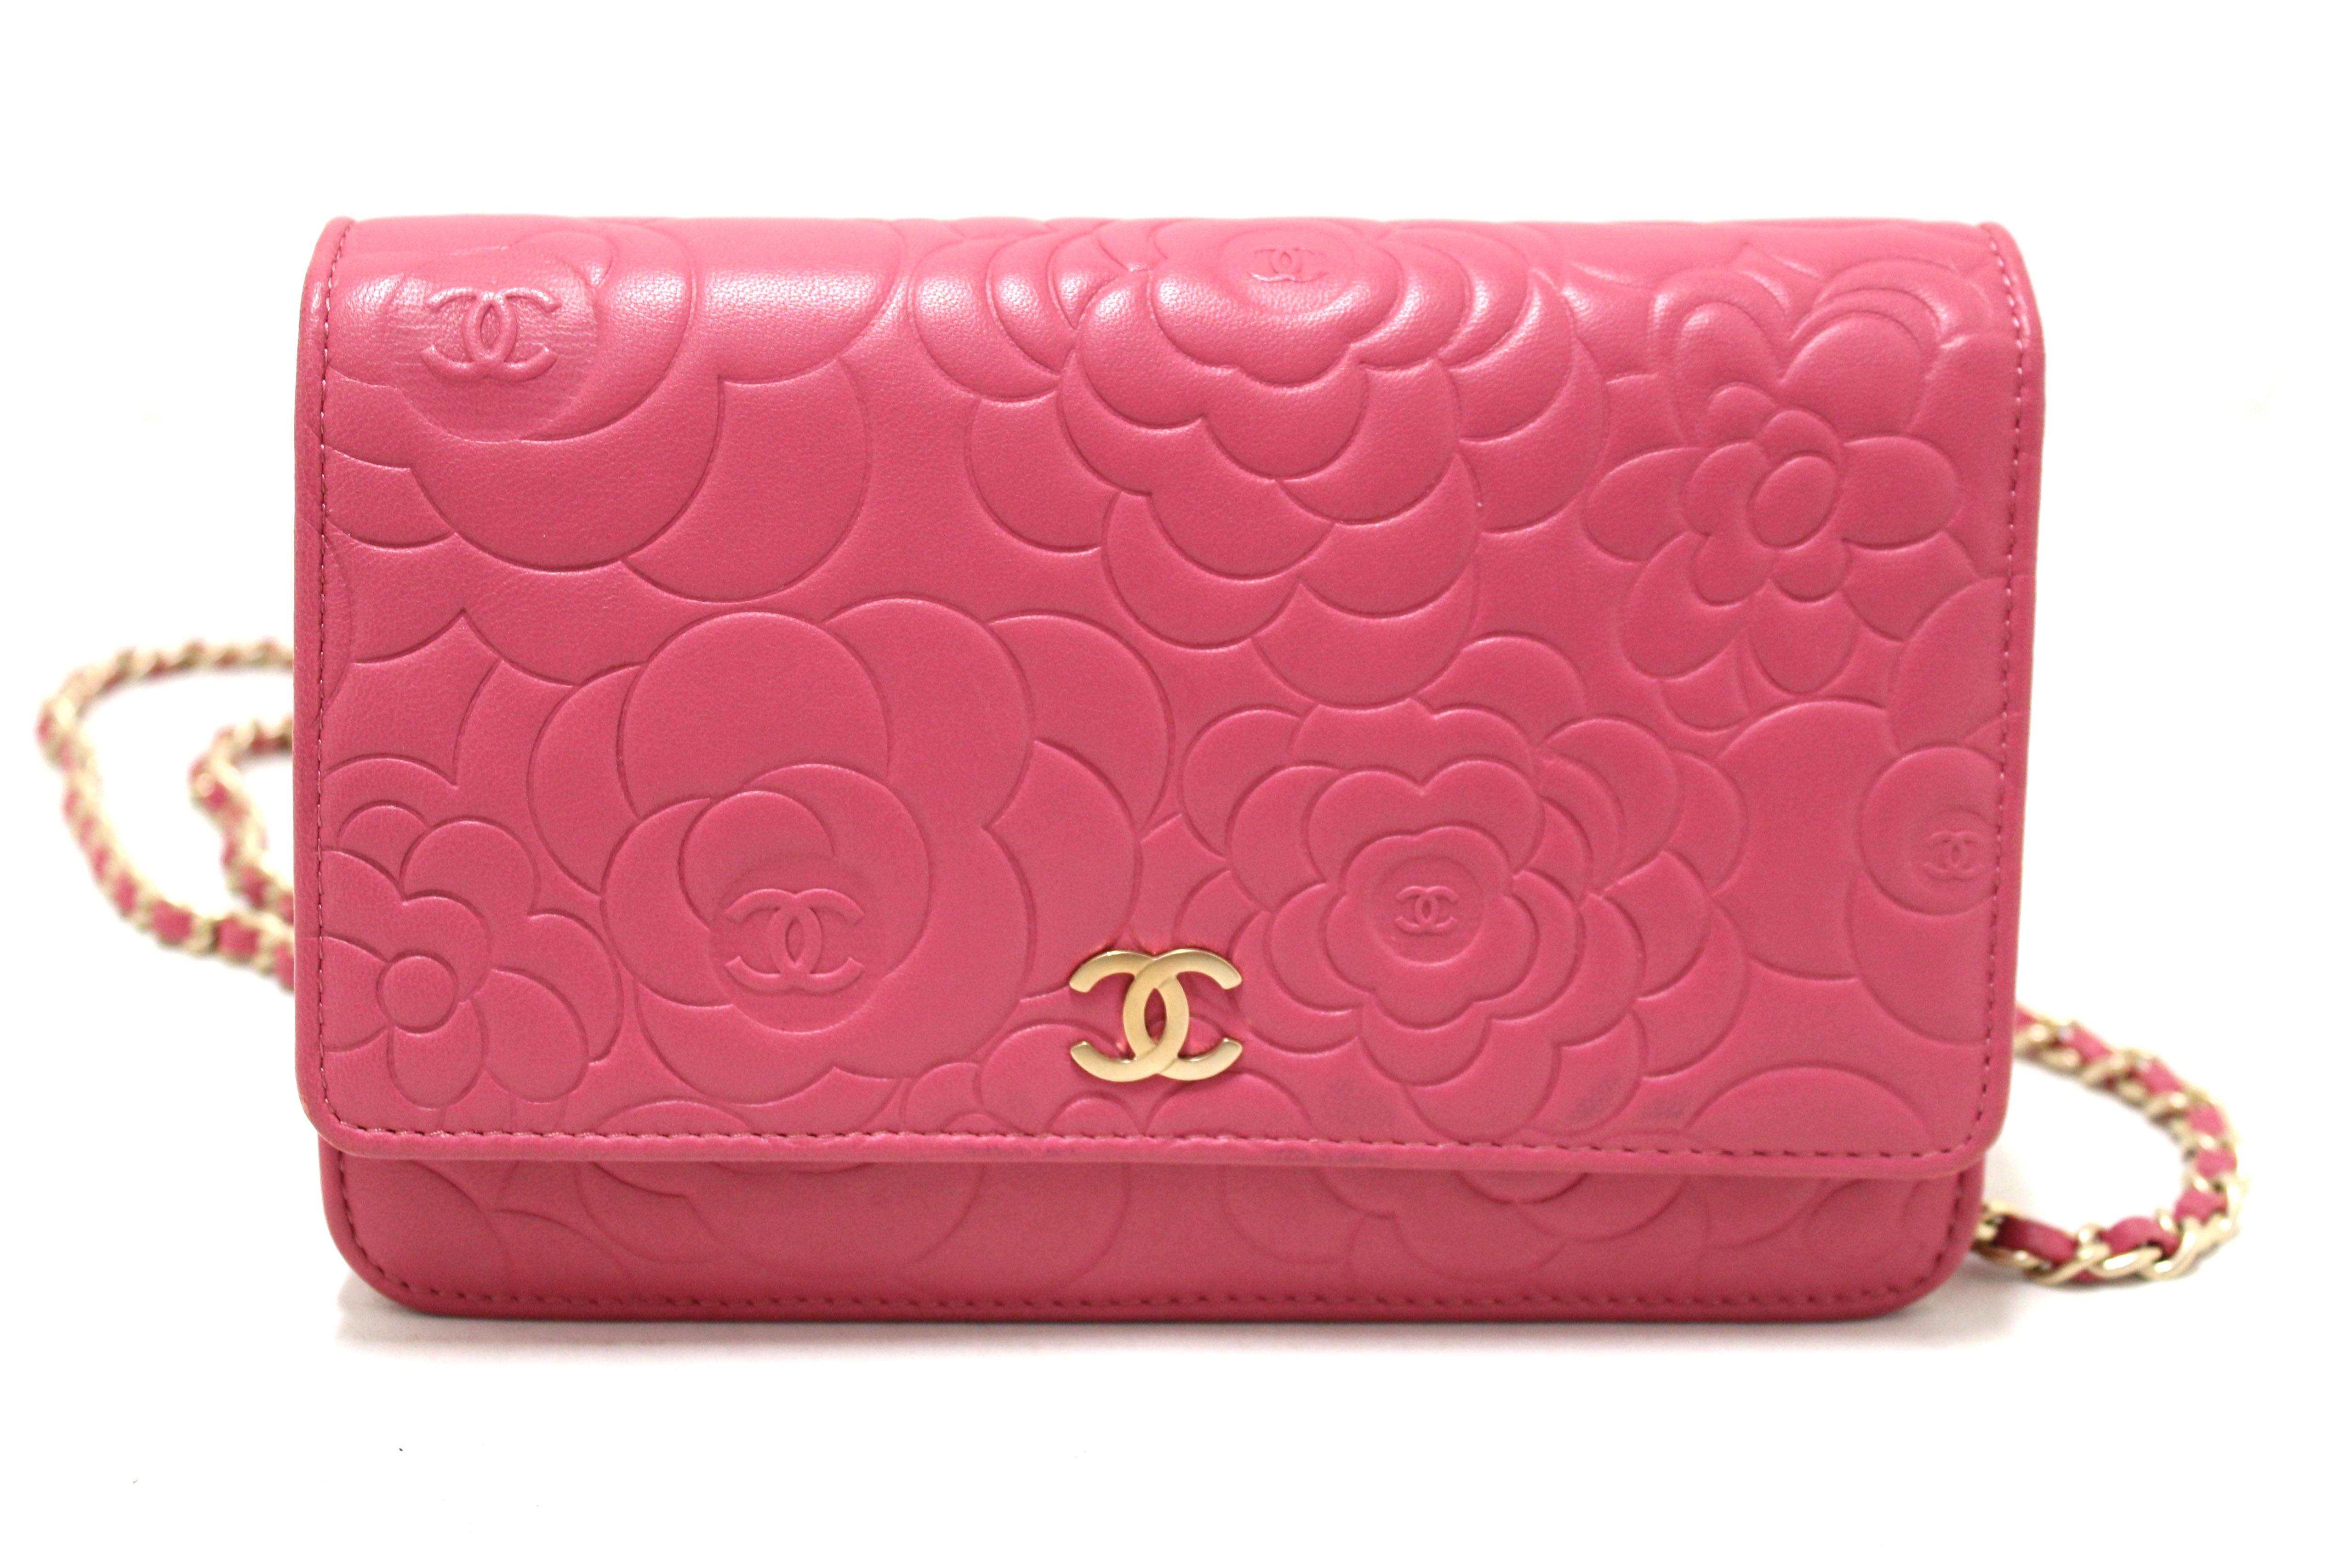 CHANEL Velvet Round Quilted Pearl Crush Clutch With Chain Pink 1164107